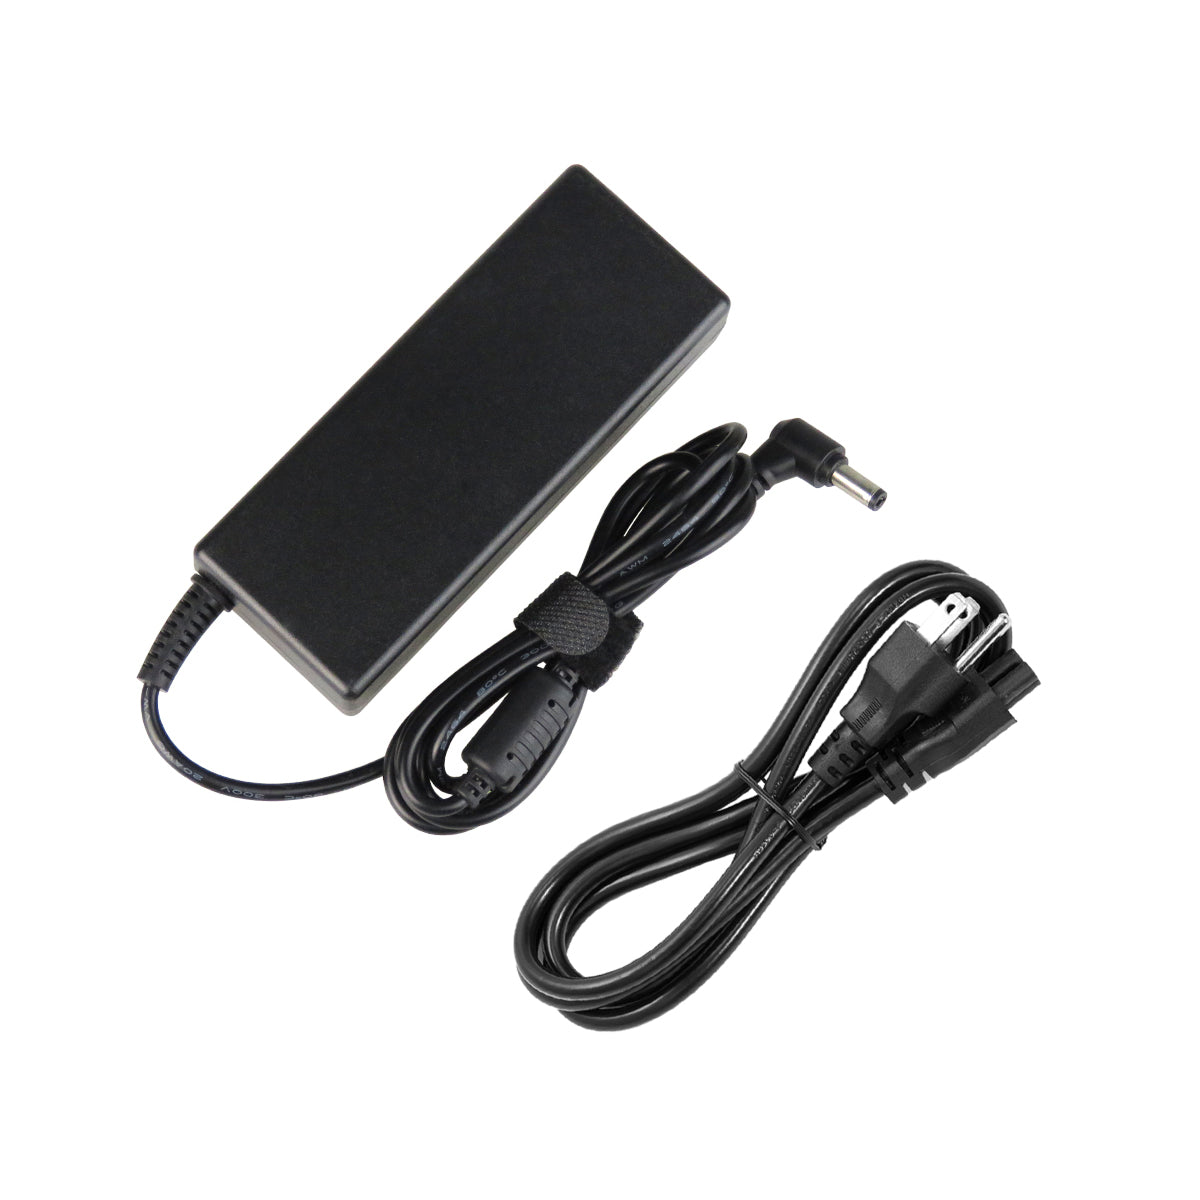 AC Adapter Charger for ASUS B51 Notebook.